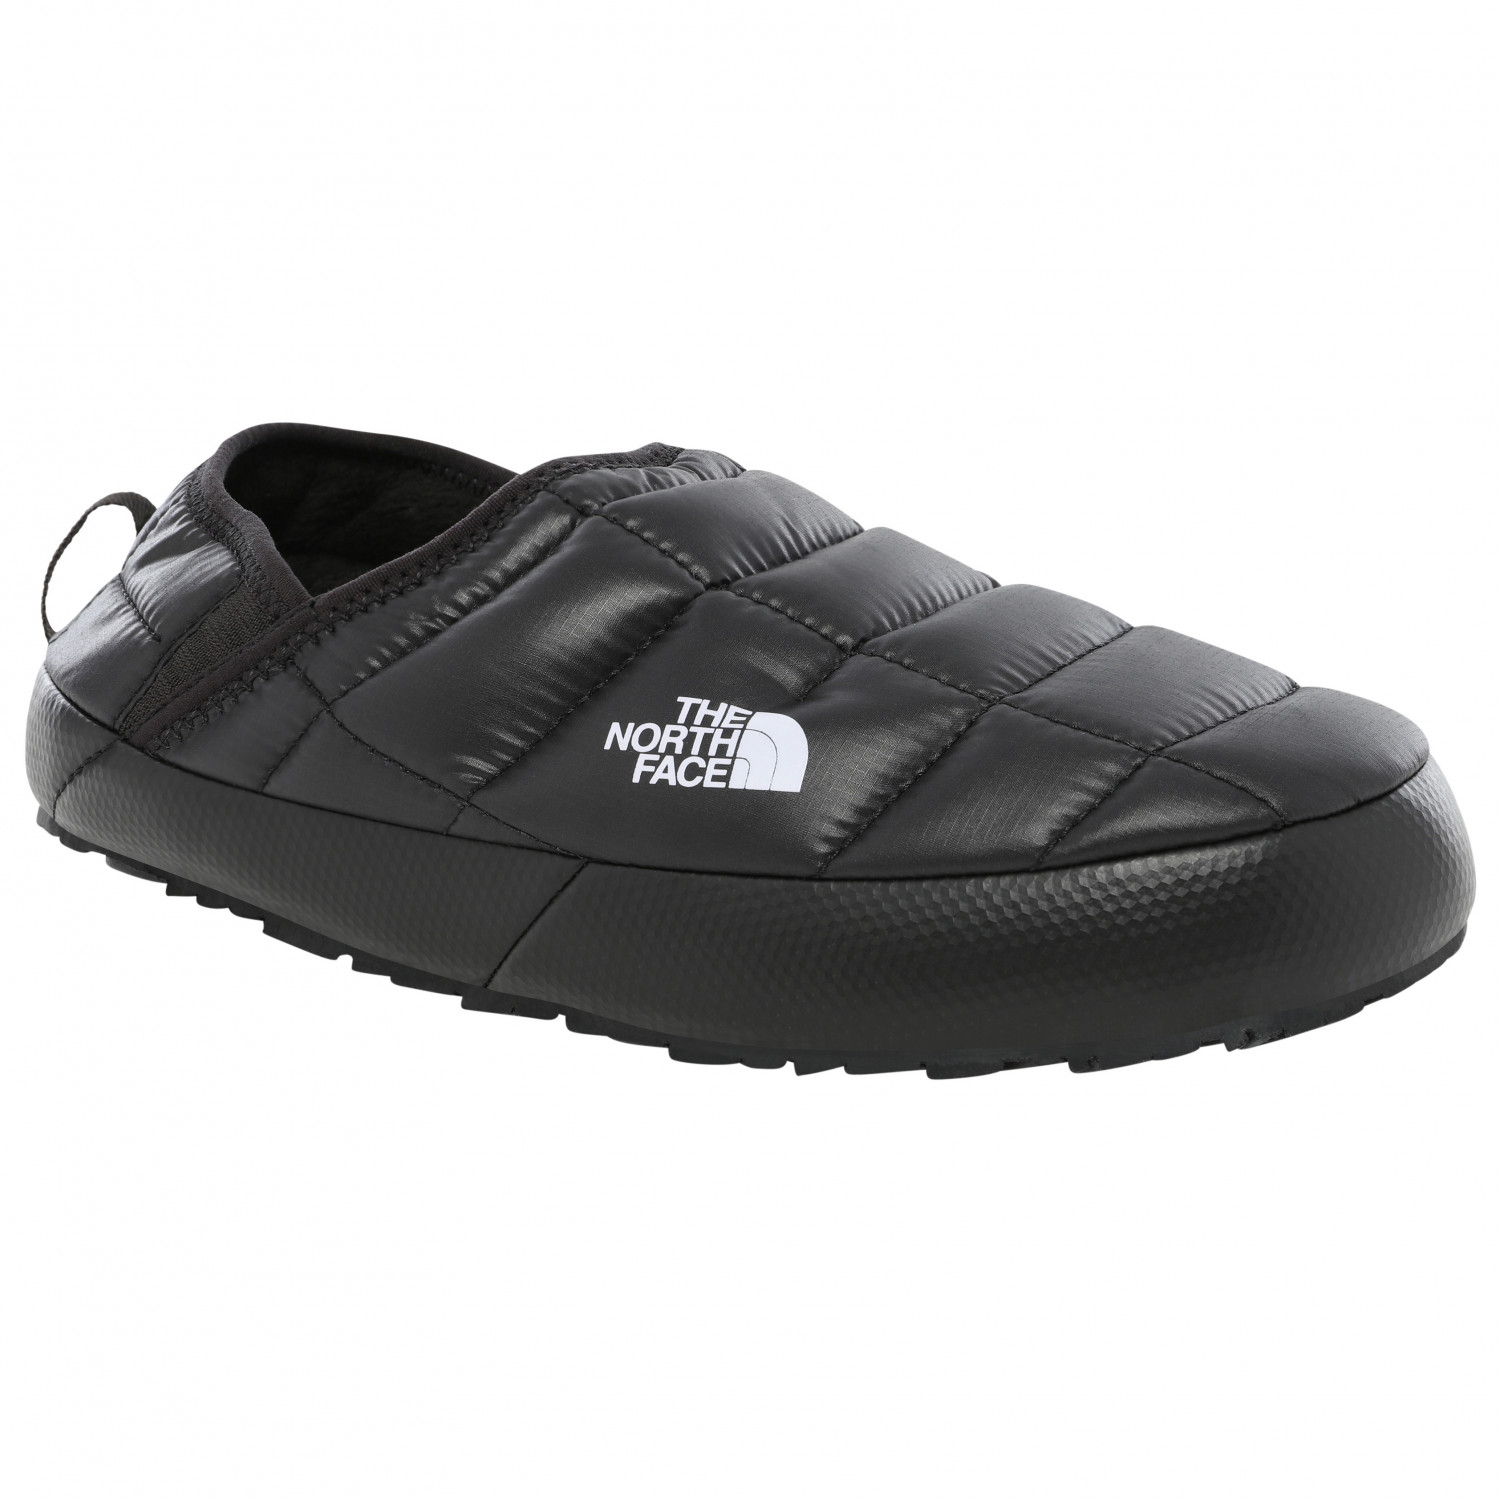 Домашние тапочки The North Face Women's ThermoBall Traction Mule V, цвет TNF Black/TNF Black